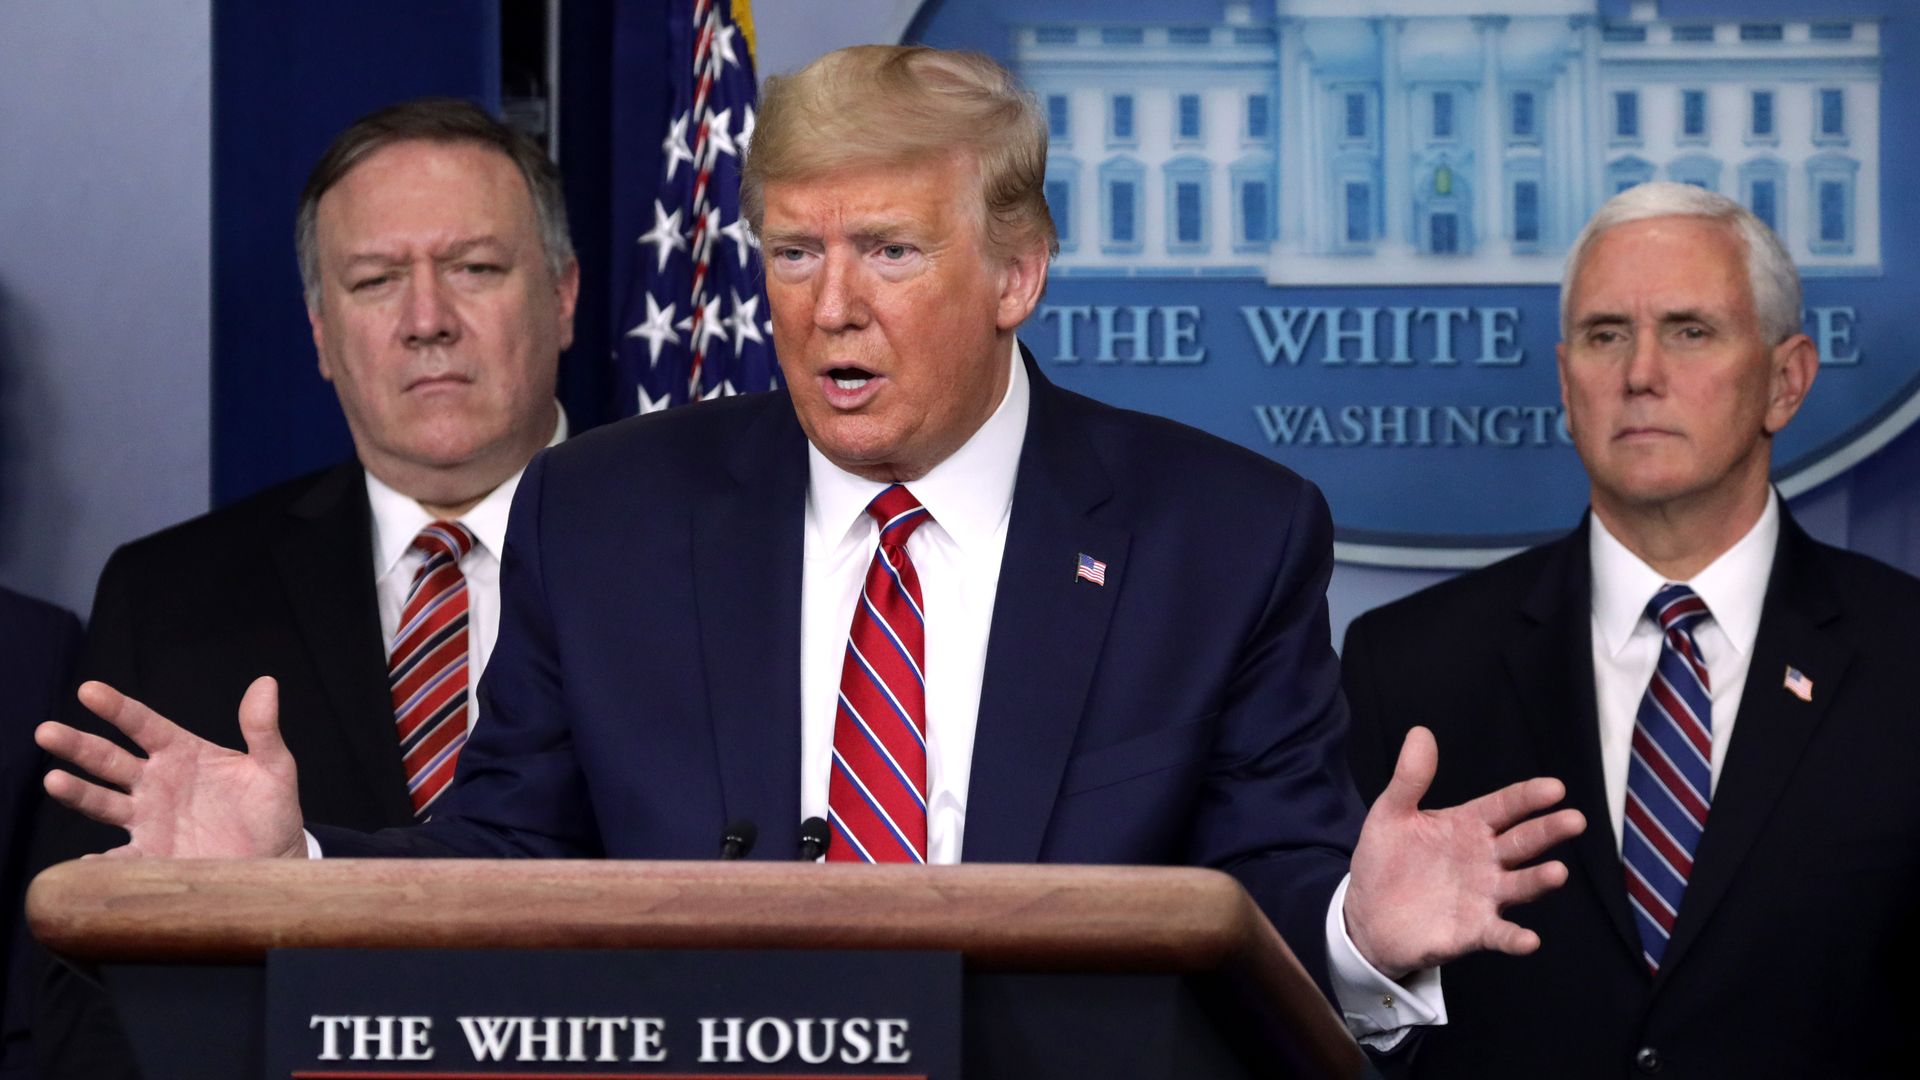 President Trump in the White House briefing room with Vice President Mike Pence and Sec. of State Mike Pompeo